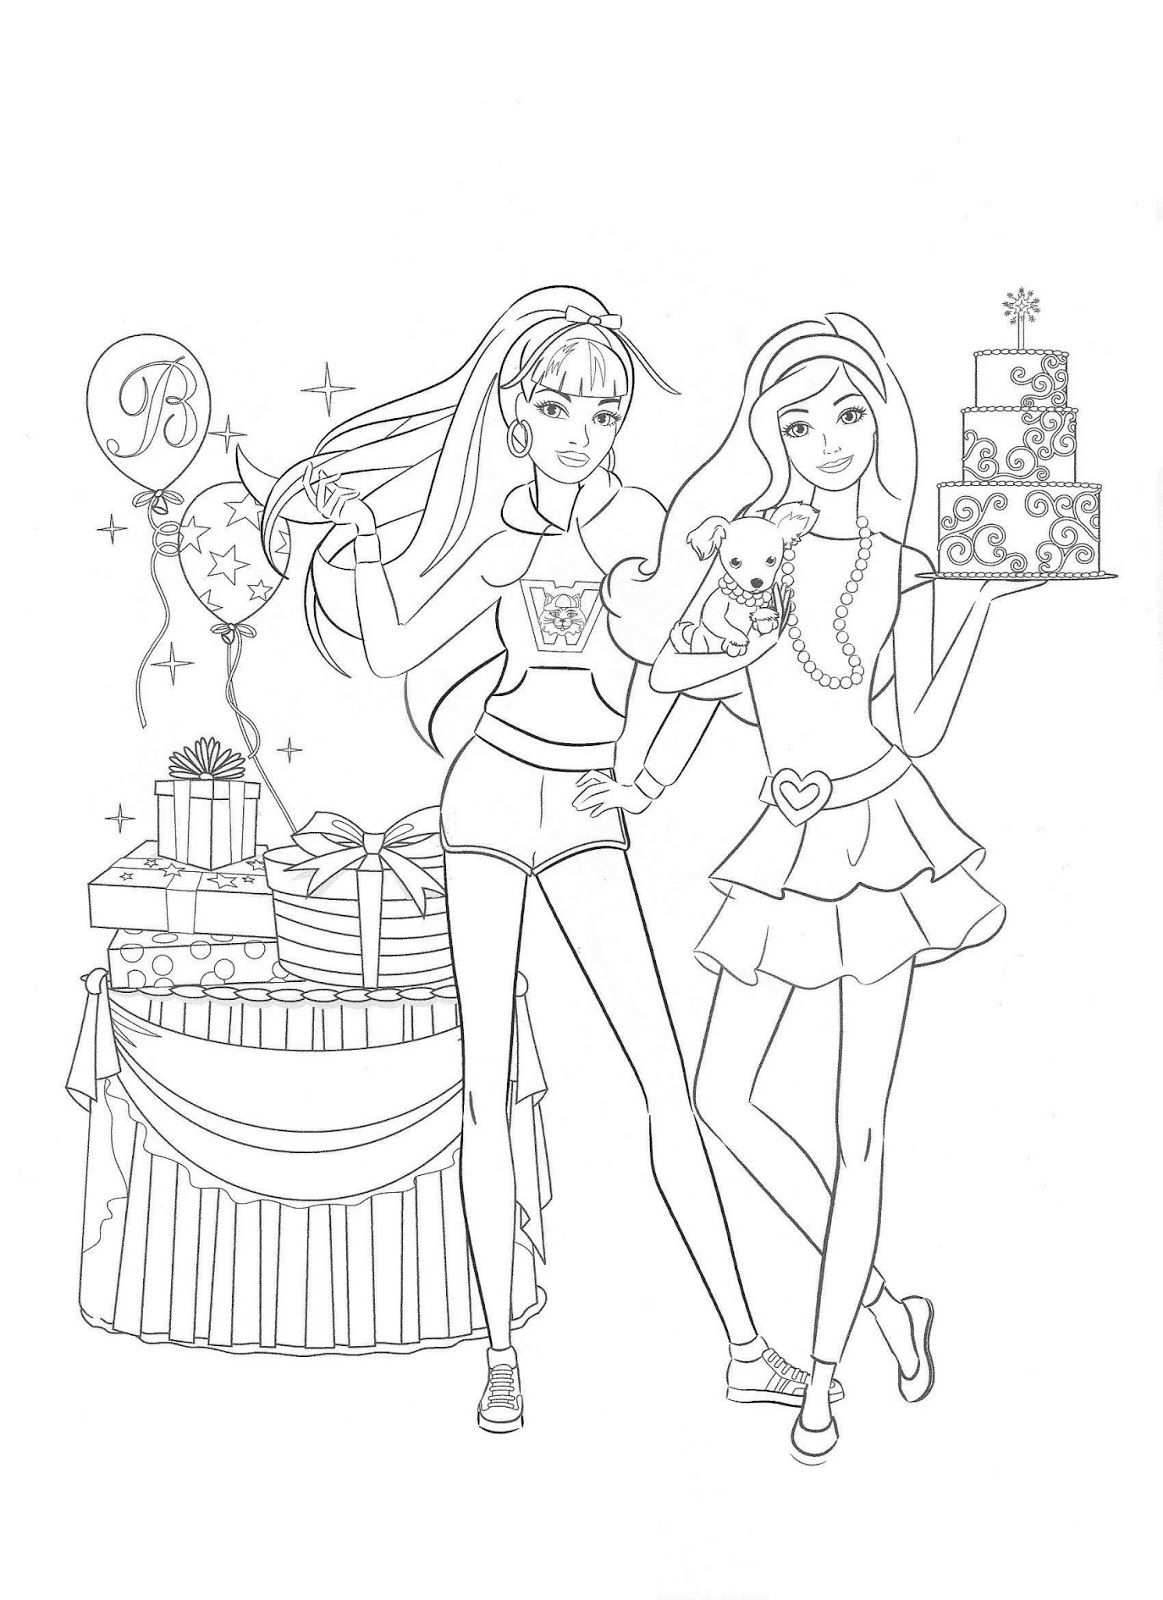 Barbie Coloring Pages Barbie Coloring Pages Barbie Coloring